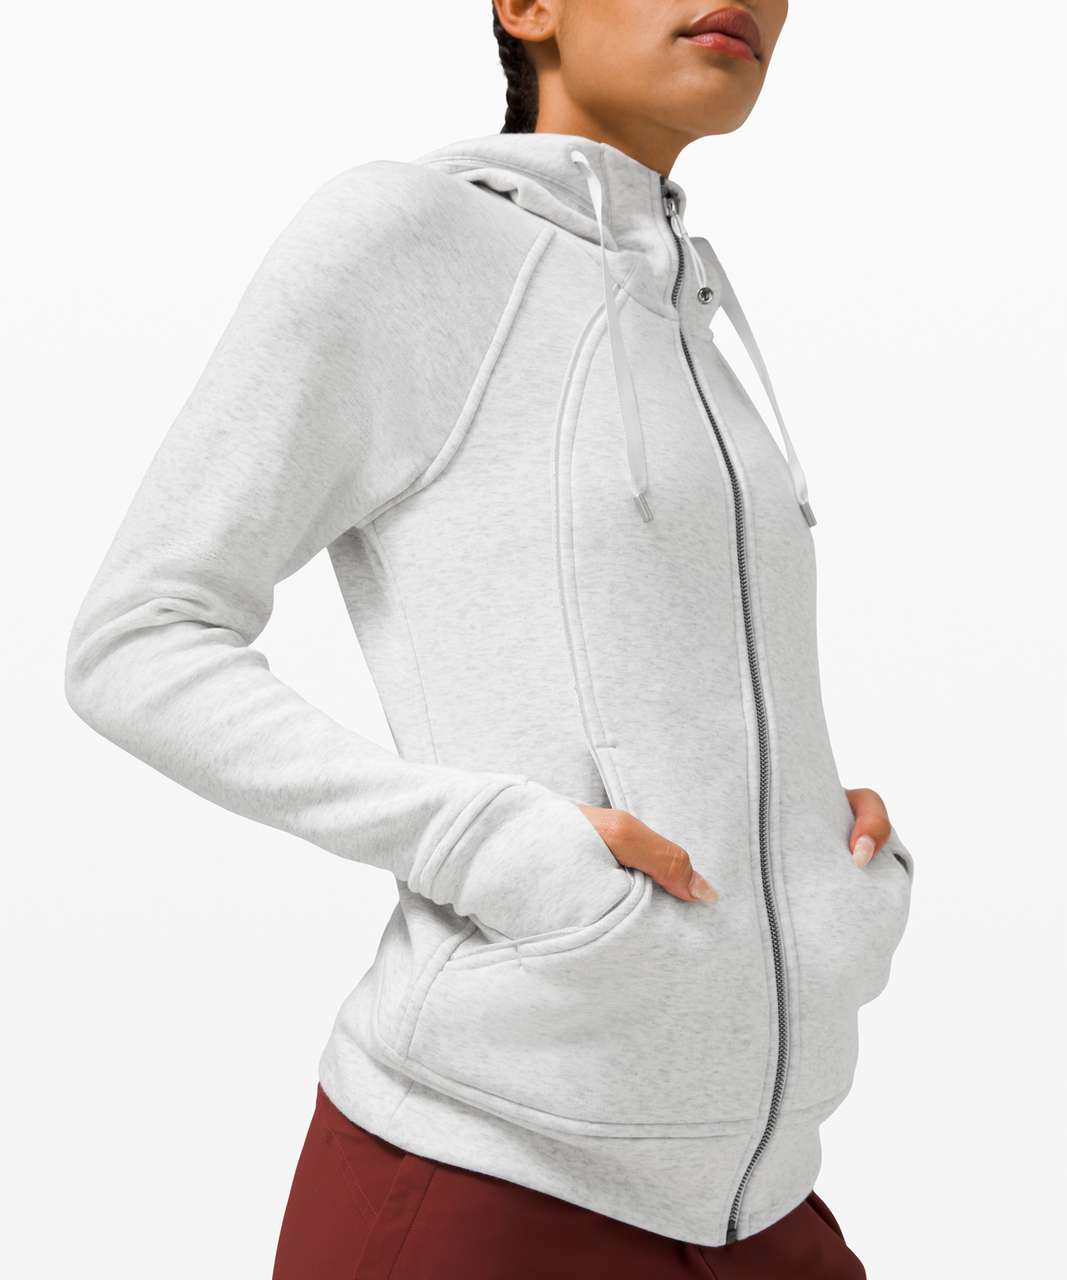 Lululemon RARE NWT Large Aloha Scuba Hoodie Size 10 Gray - $230 (34% Off  Retail) New With Tags - From Melissa